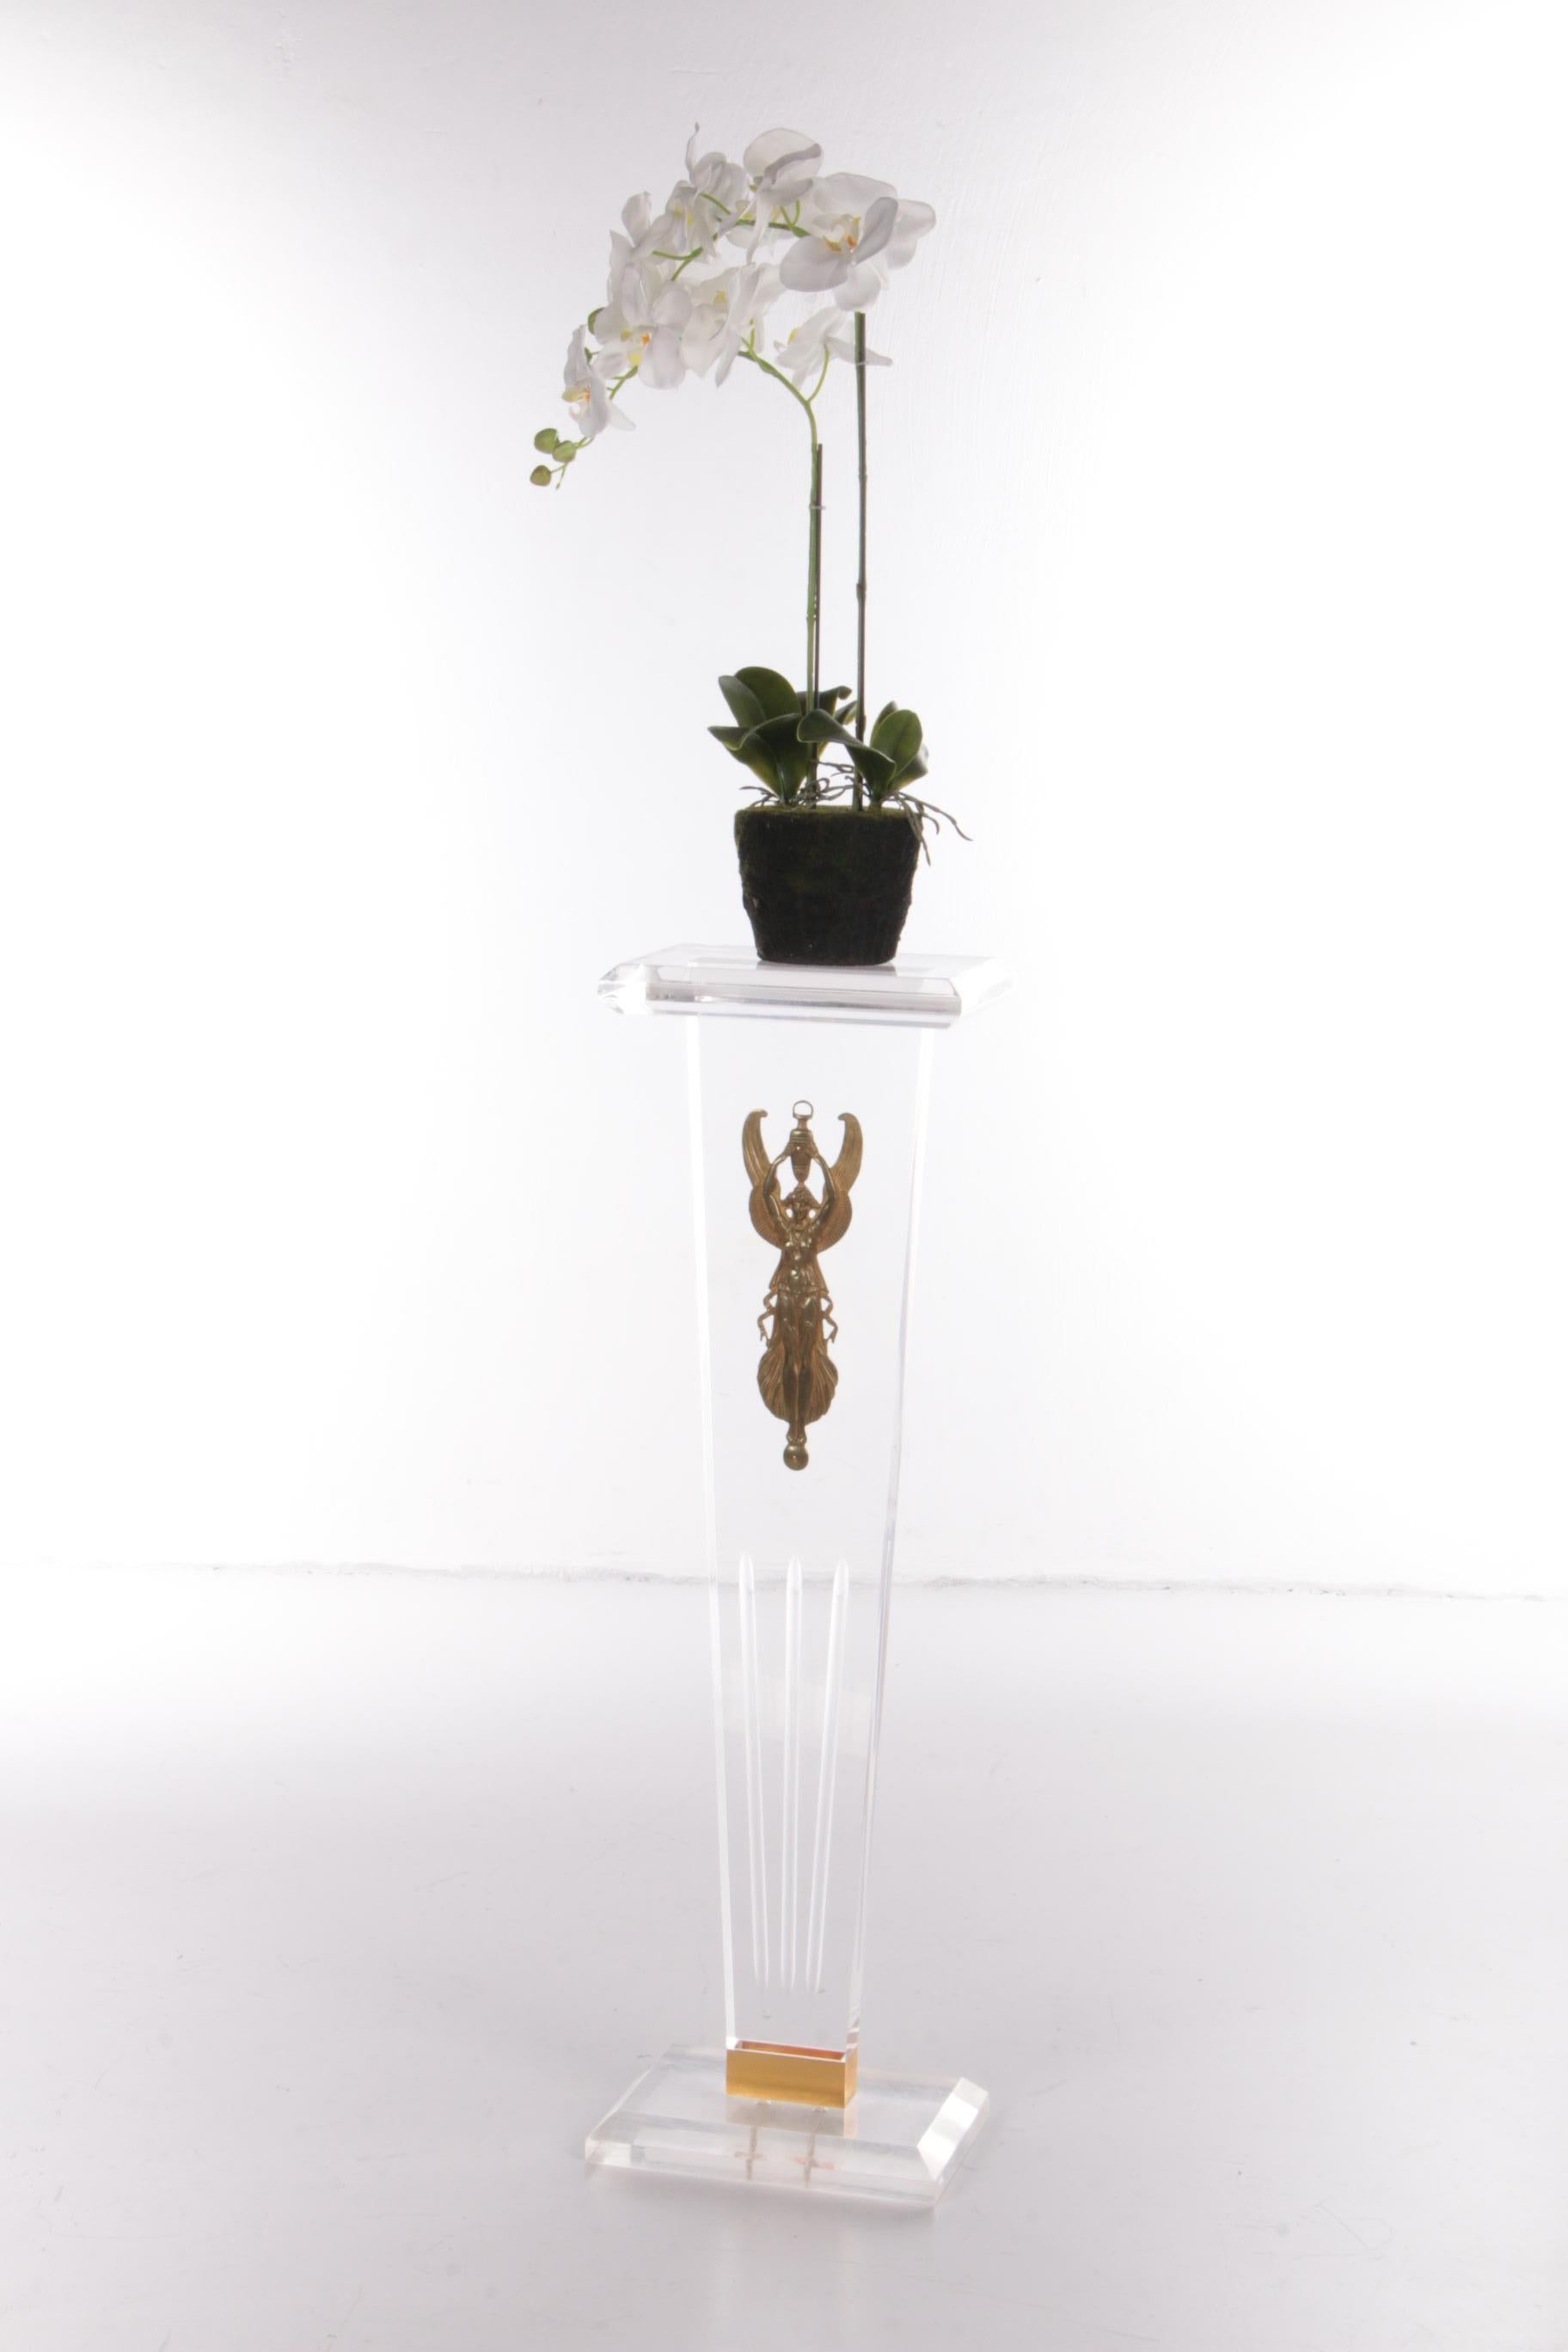 Vintage Plexiglas stand or console with brass Lady, 1970 Italy.


A beautiful vintage decorative acrylic stand or console. This one is made in Italy, it dates from around the 1970s.

The quality is excellent, this is long and slim, it is a very